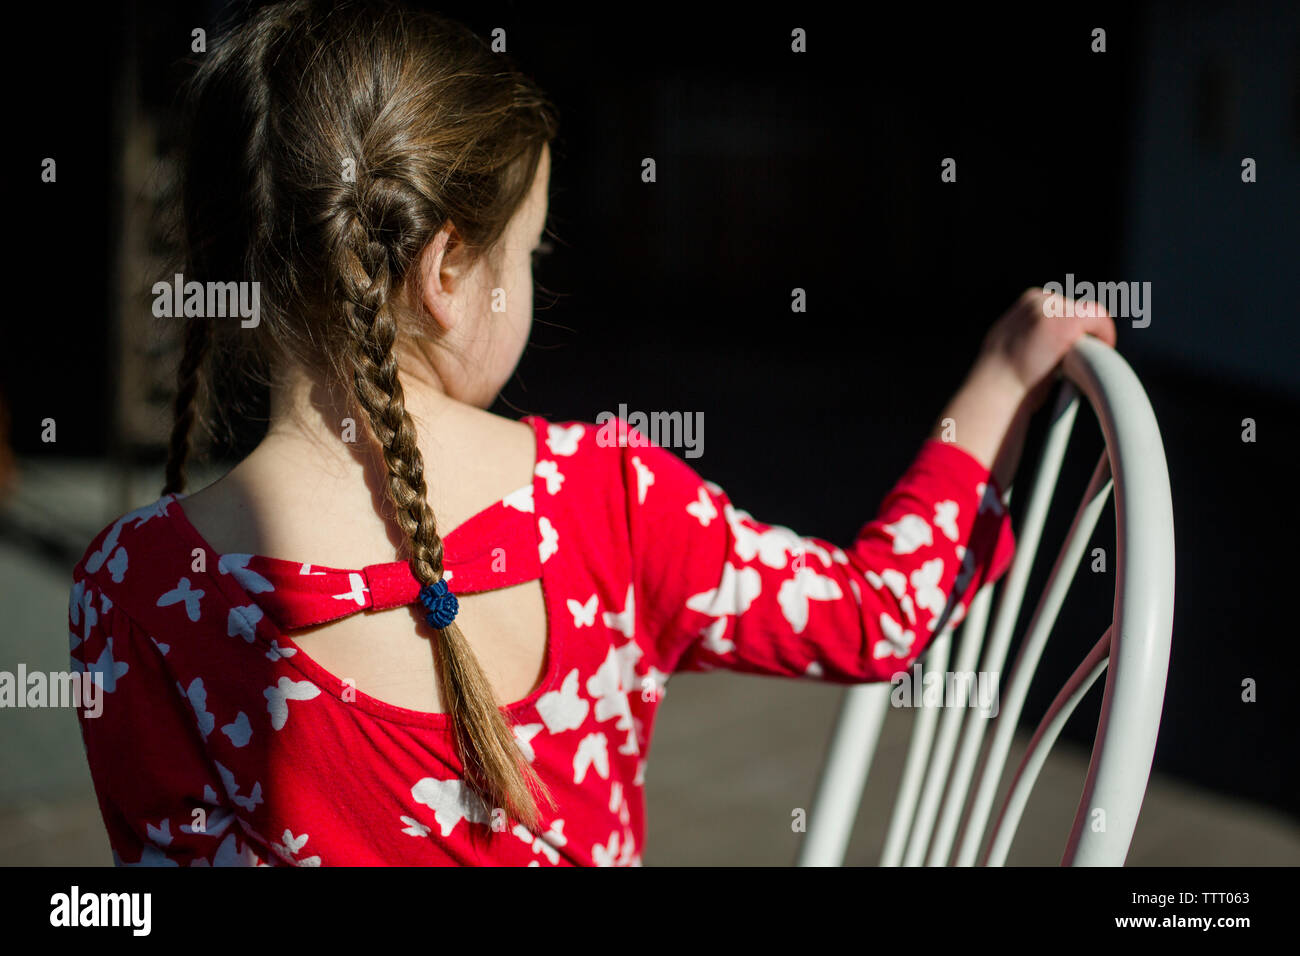 rear view of a little girl with long braids sitting in patch of light Stock Photo